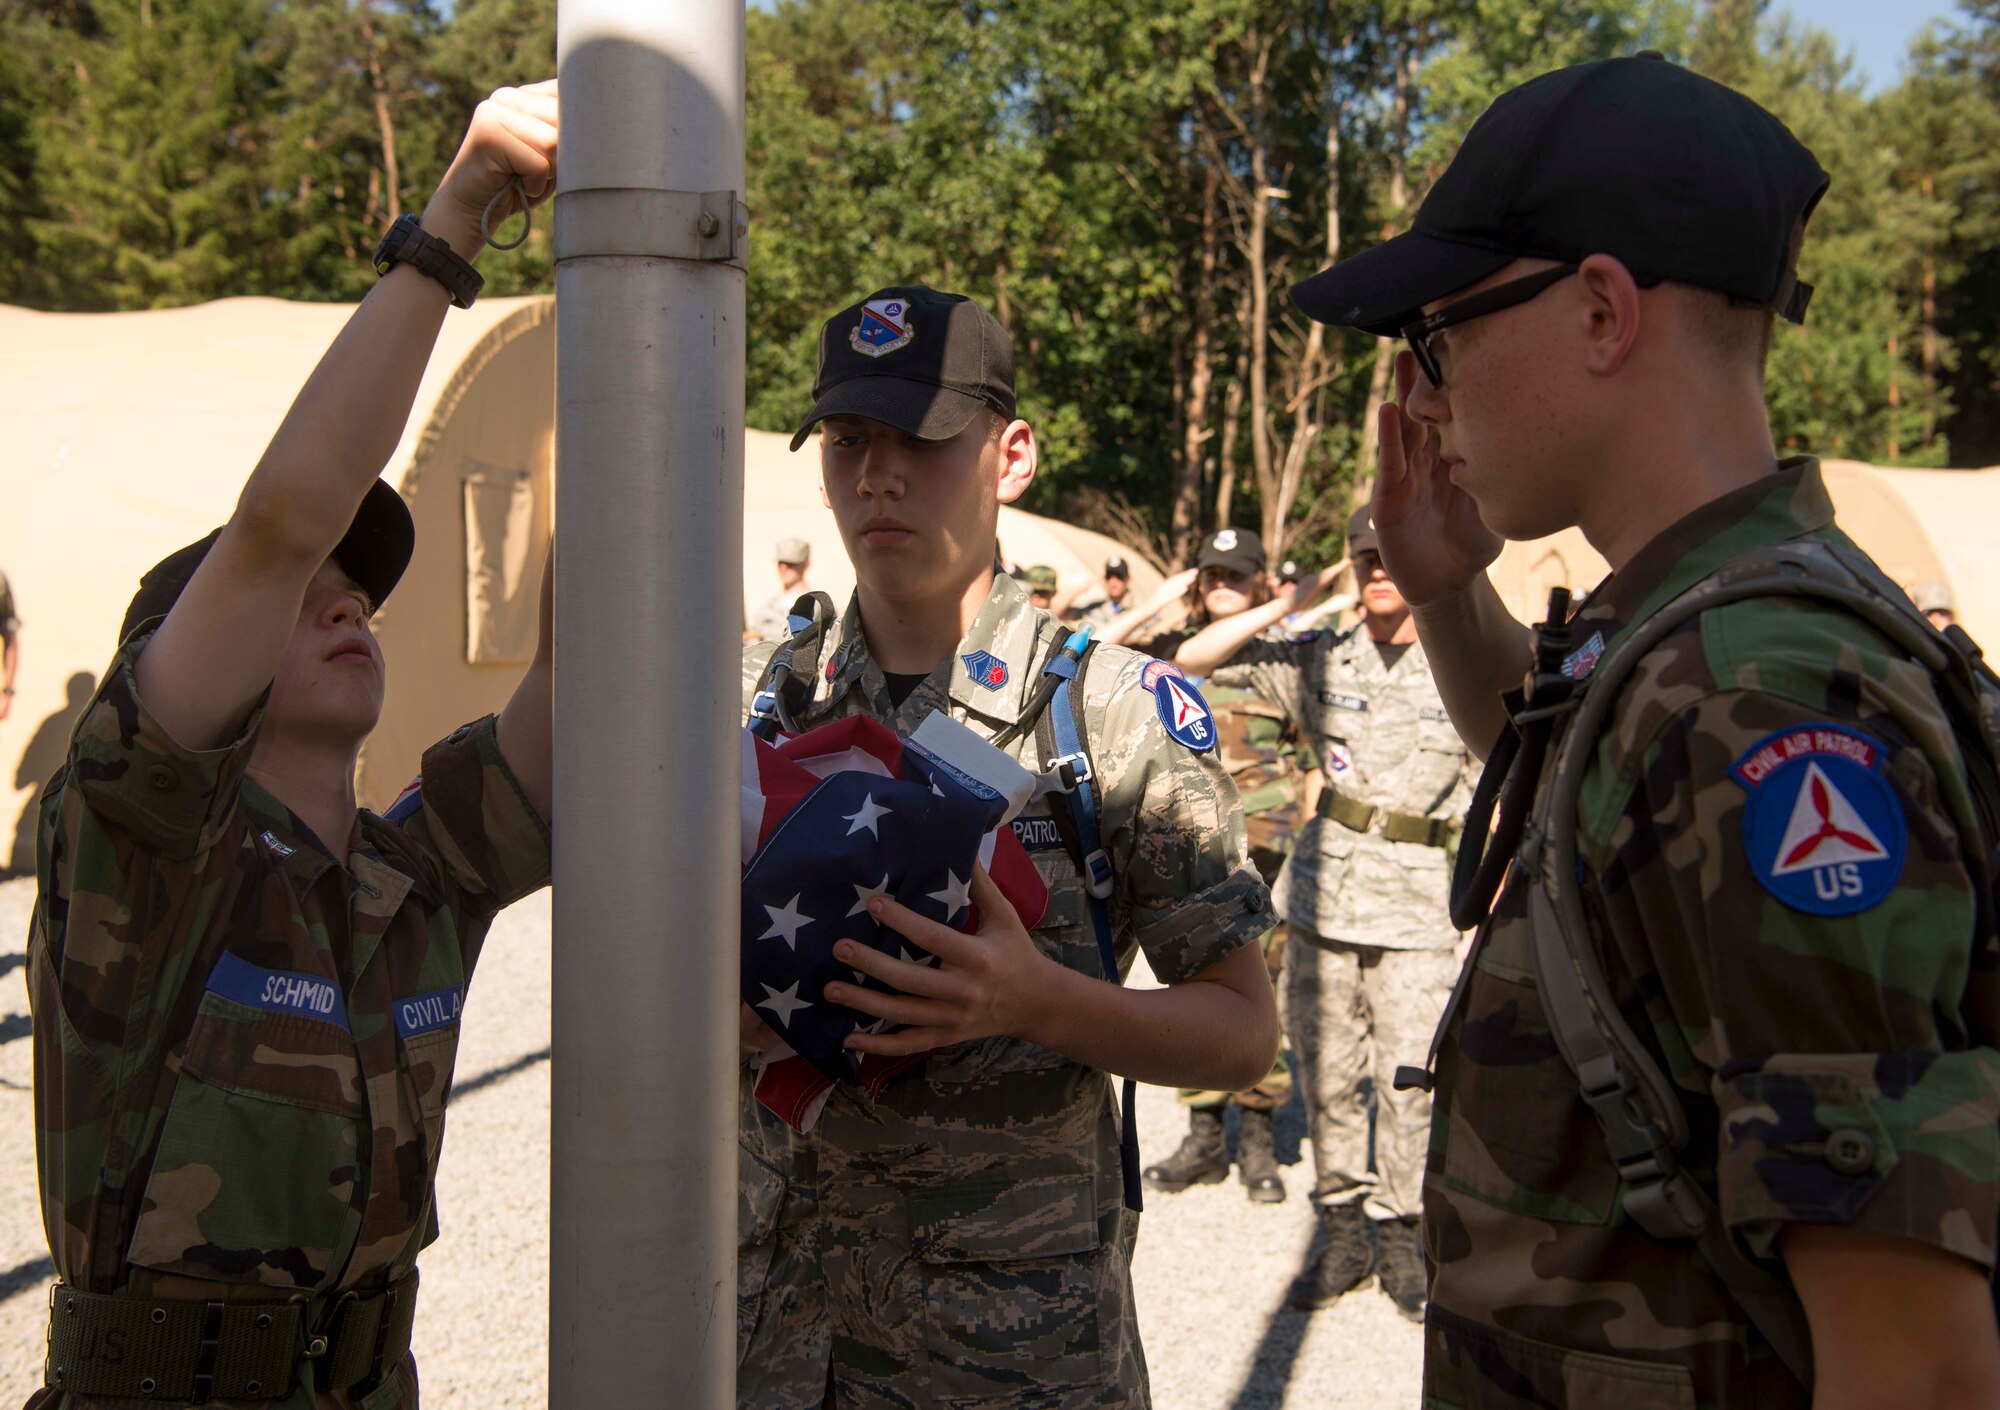 Cadets with the Civil Air Patrol European Encampment take down a flag during Retreat on Ramstein Air Base, Germany, June 19, 2017. The encampment curriculum encompasses four core areas: aerospace education, leadership development, character development, and physical fitness. The curriculum is designed, in part, to prepare cadets for a possible military aerospace career. (U.S. Air Force photo by Senior Airman Elizabeth Baker)